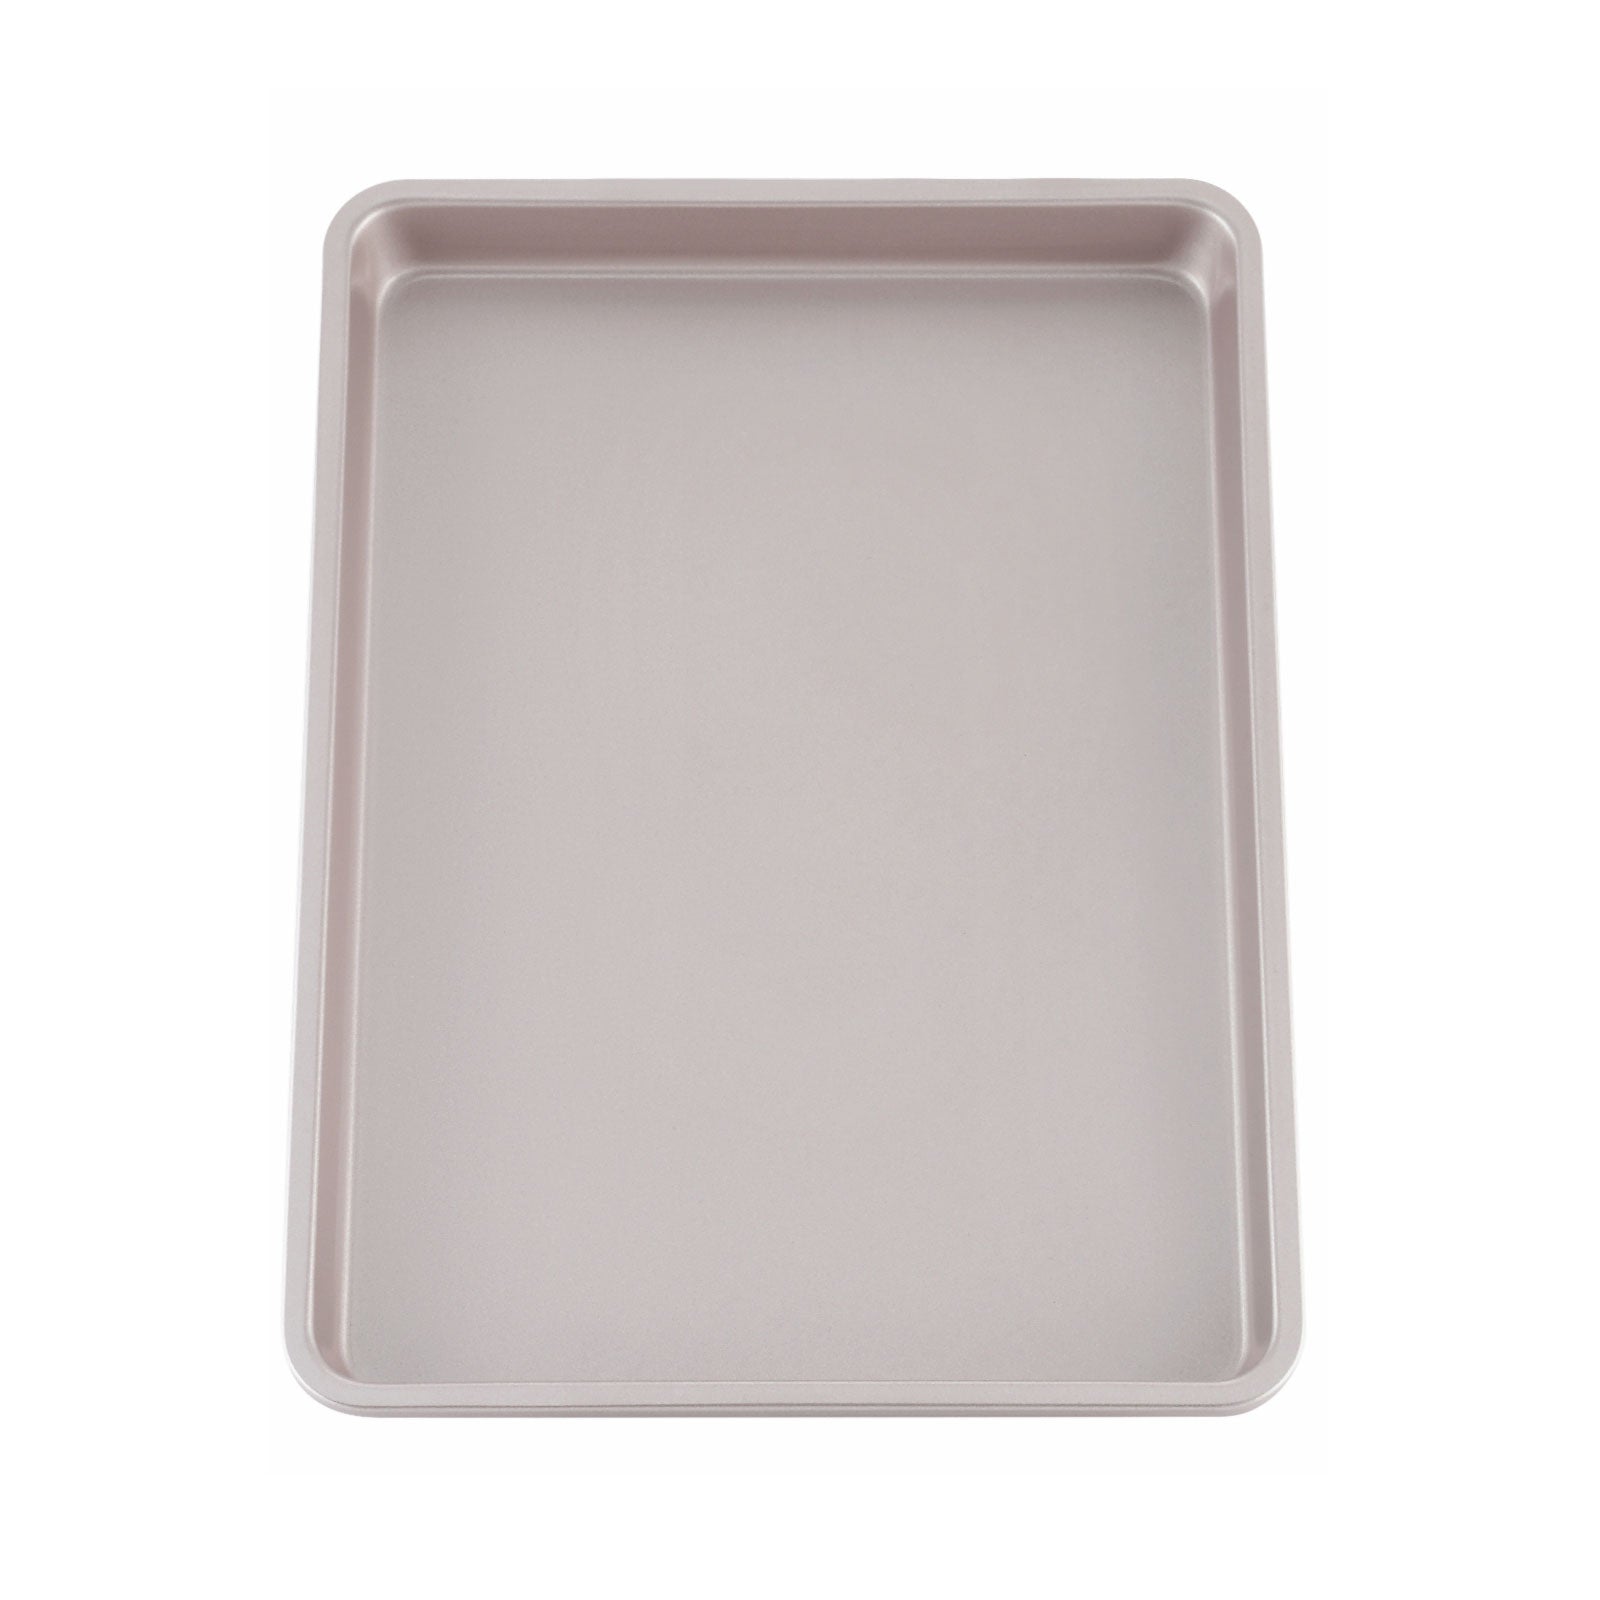 Copper Chef 12x17 Cookie Sheet